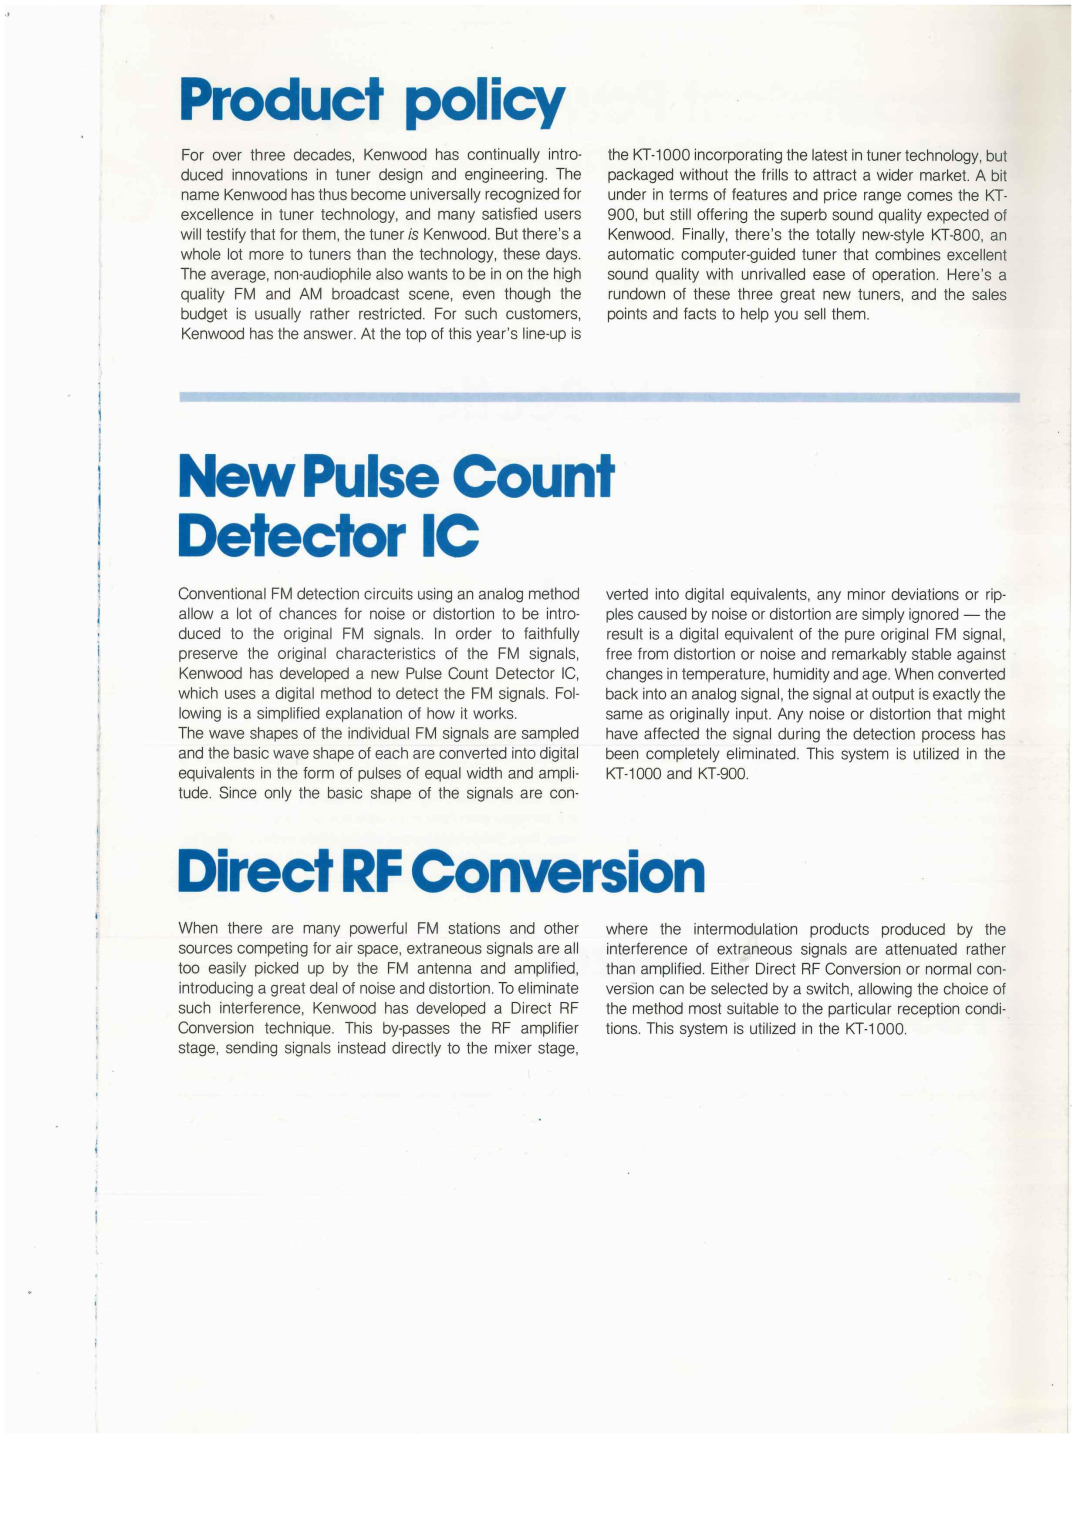 Kenwood KT-1000 manual Direct RF Conversion, New Pulse Count Detector IC, Product policy 